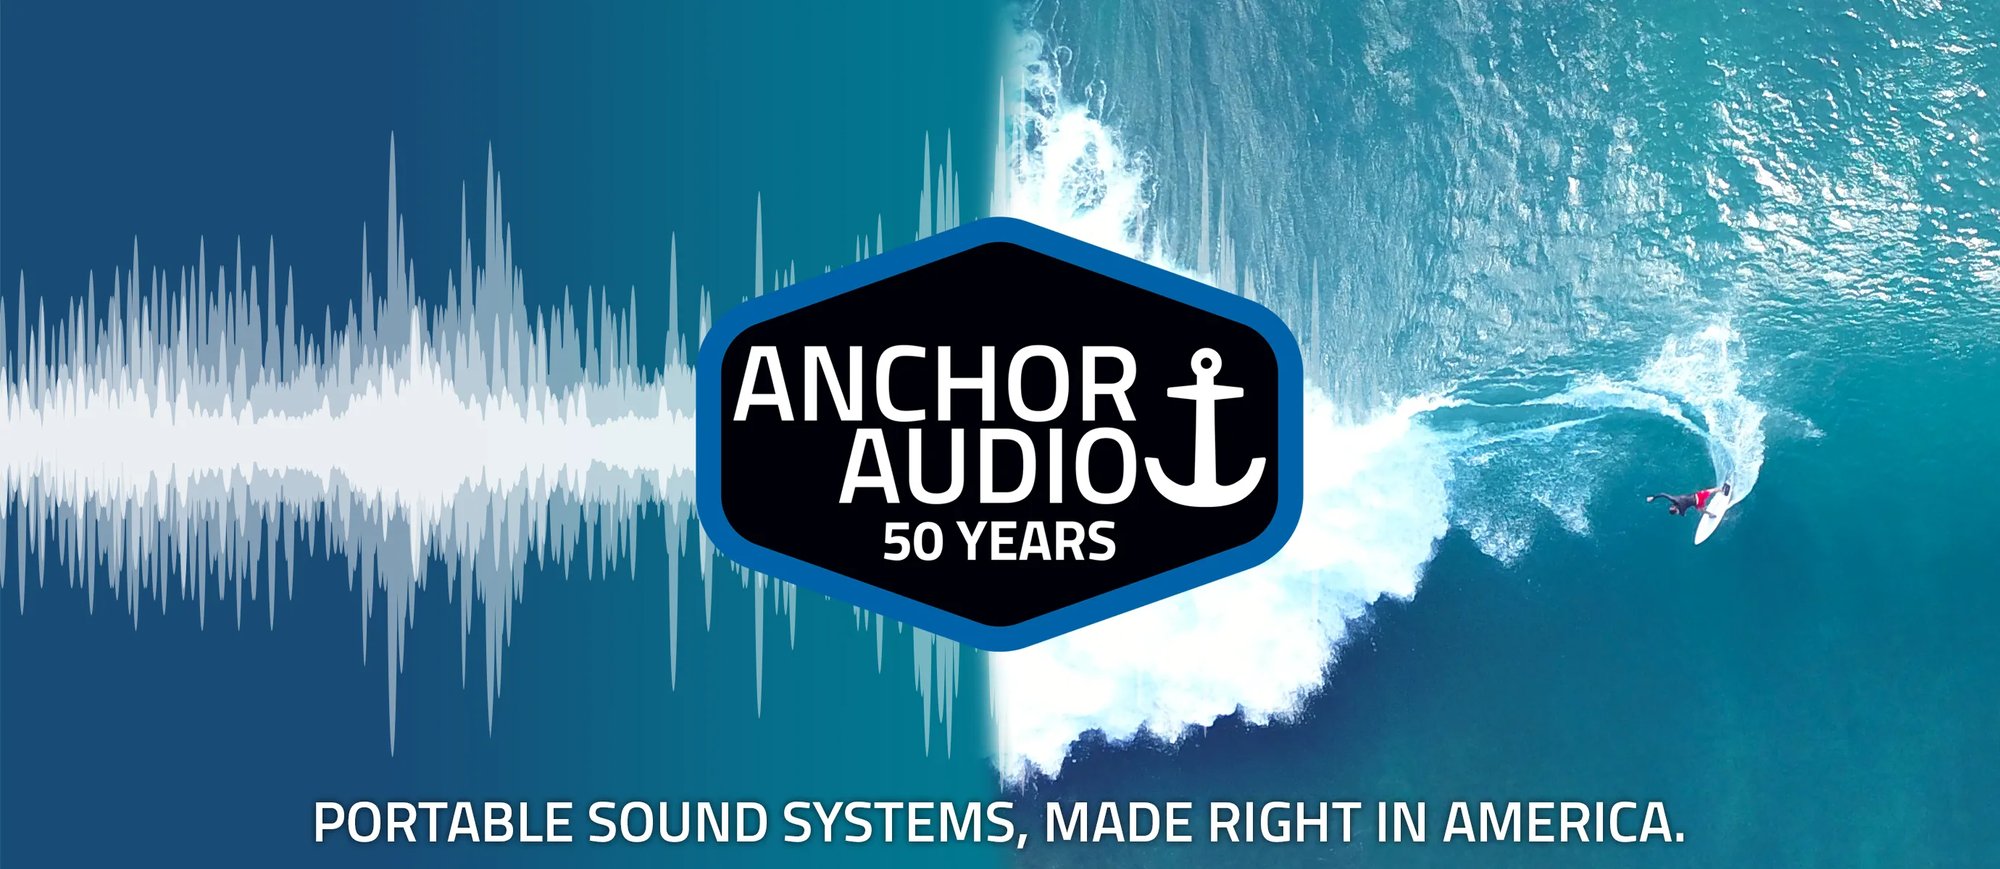 Anchor Audio Celebrating 50 Years of Making PA Systems Right in America